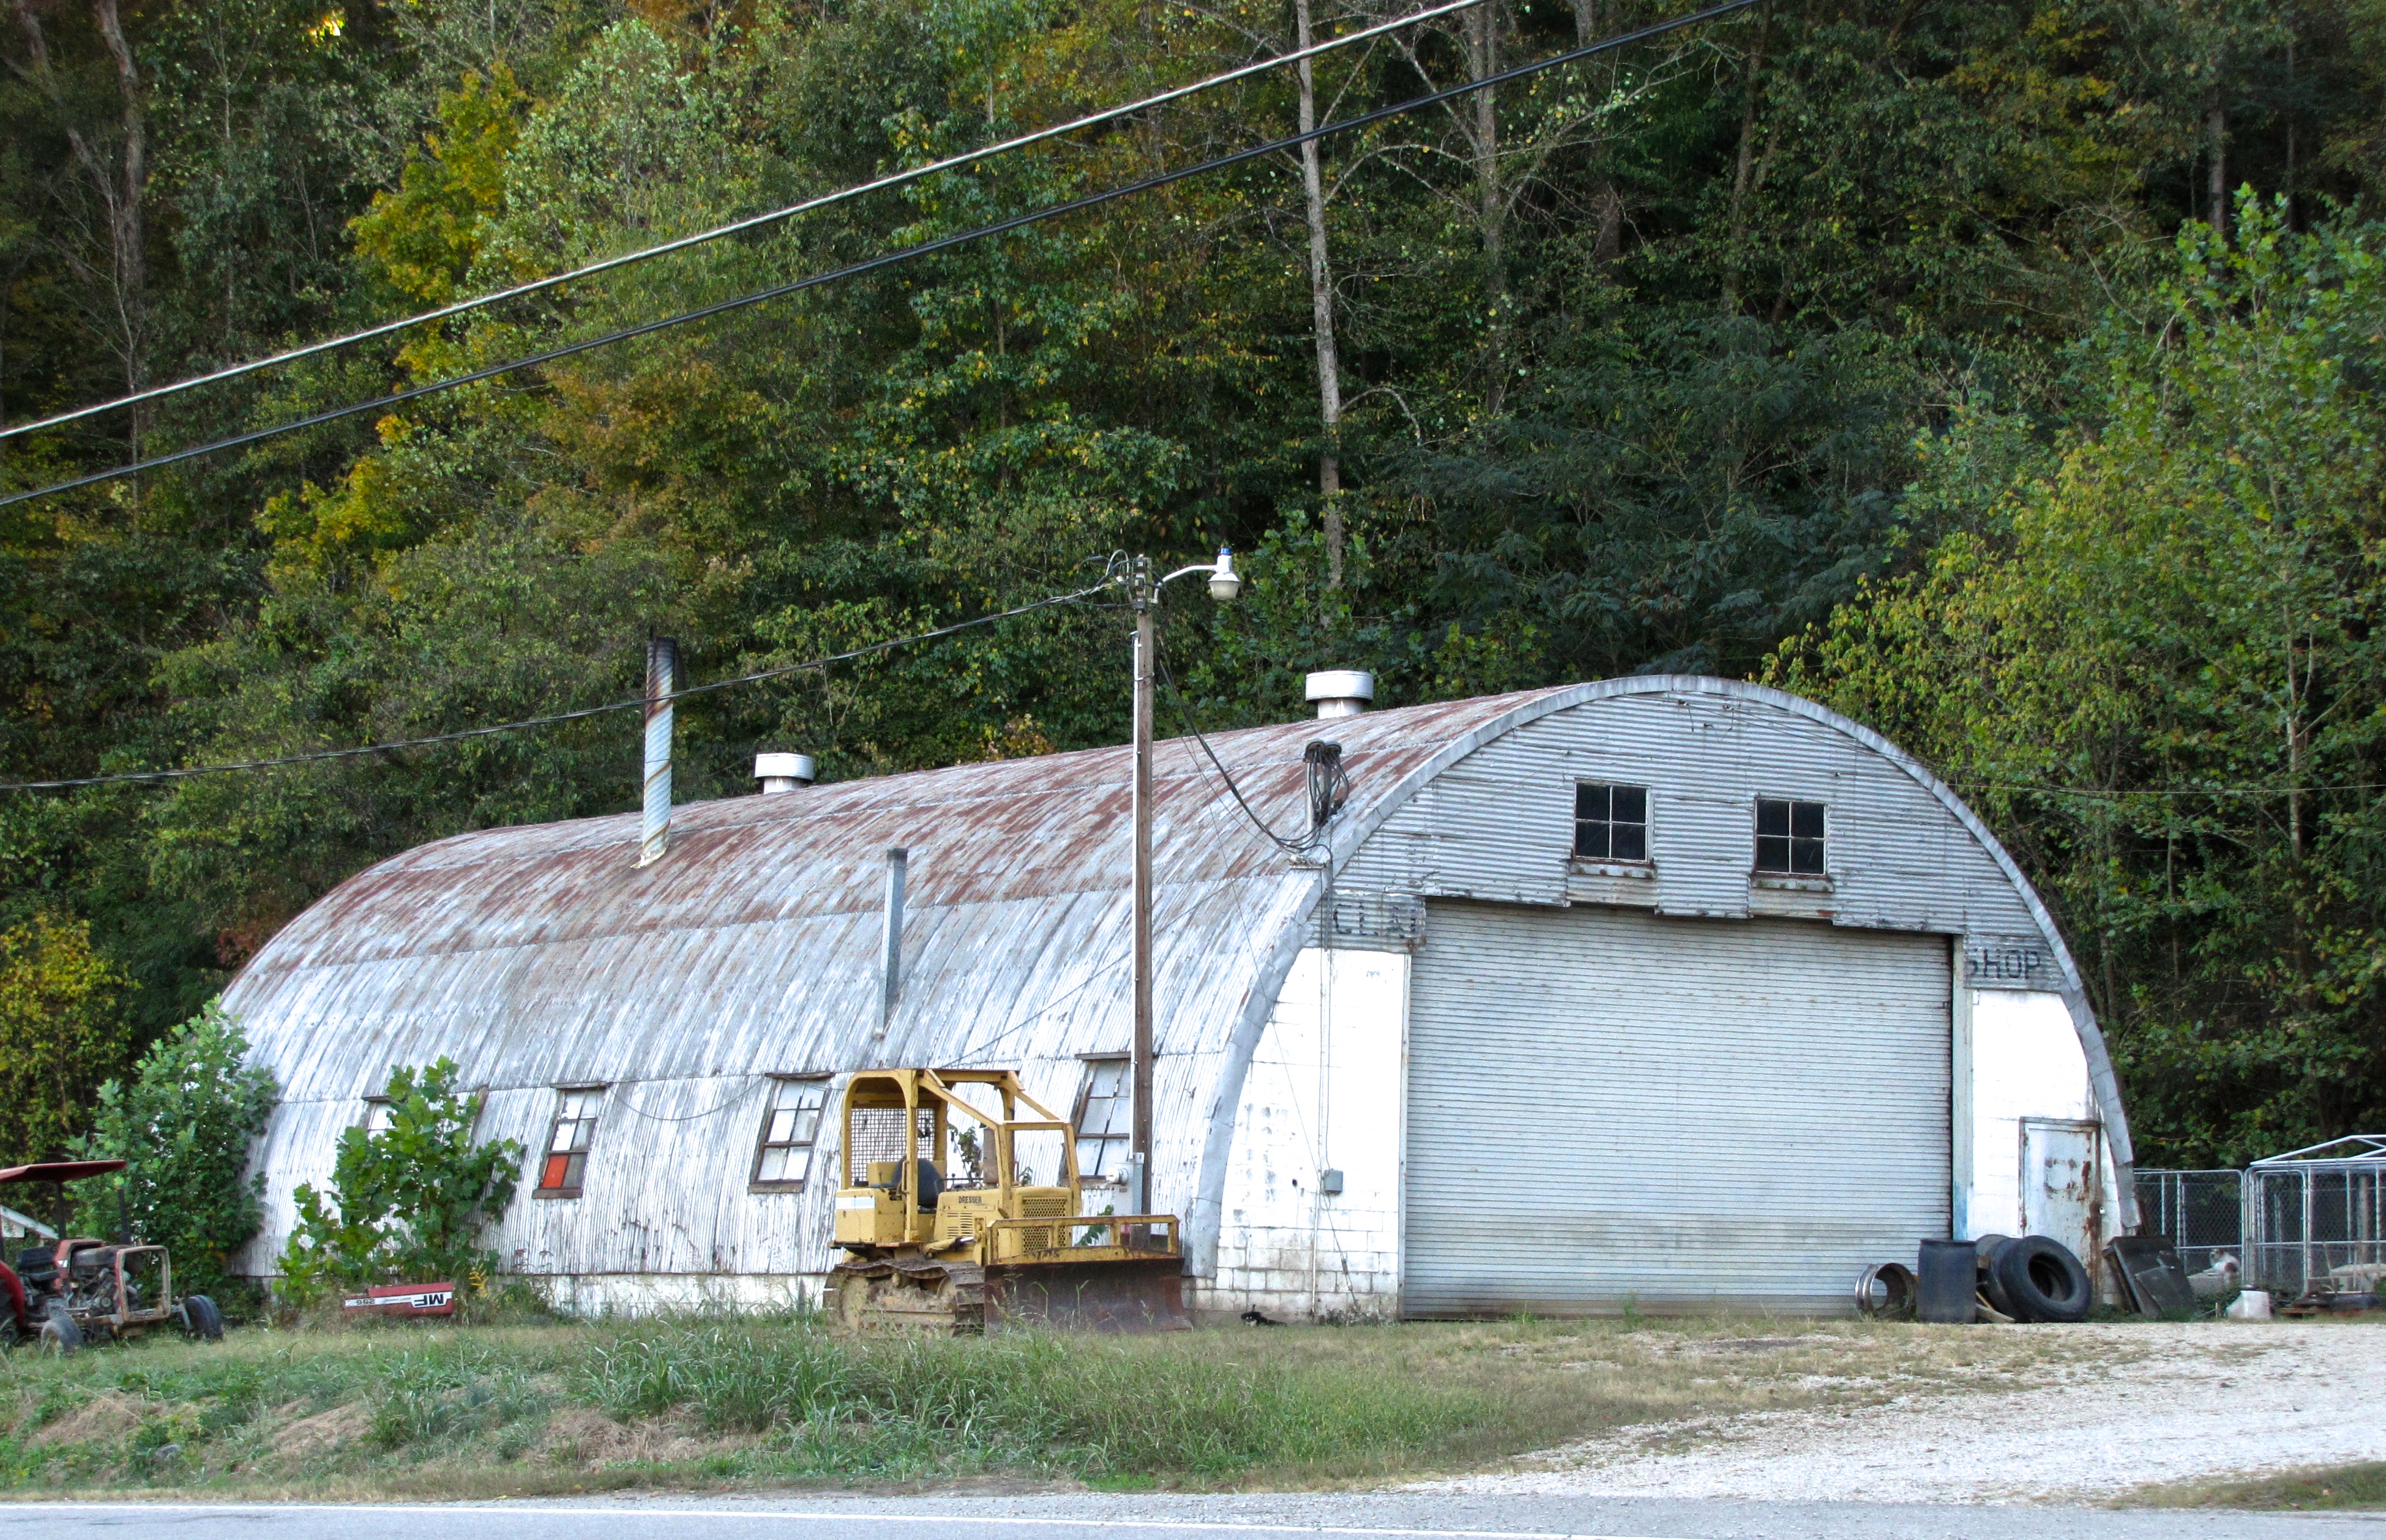 quonset hut in New York, NY